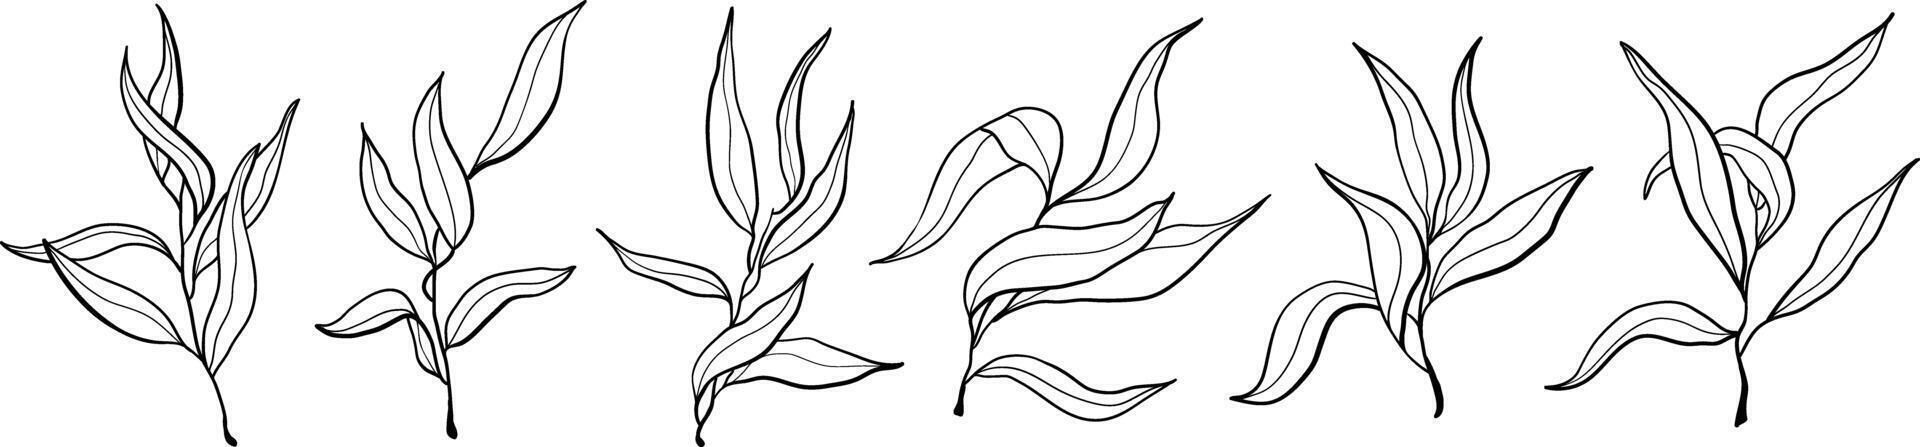 Vector hand drawn nature olive branches icons set. Doodle plants illustration isolated on white background.